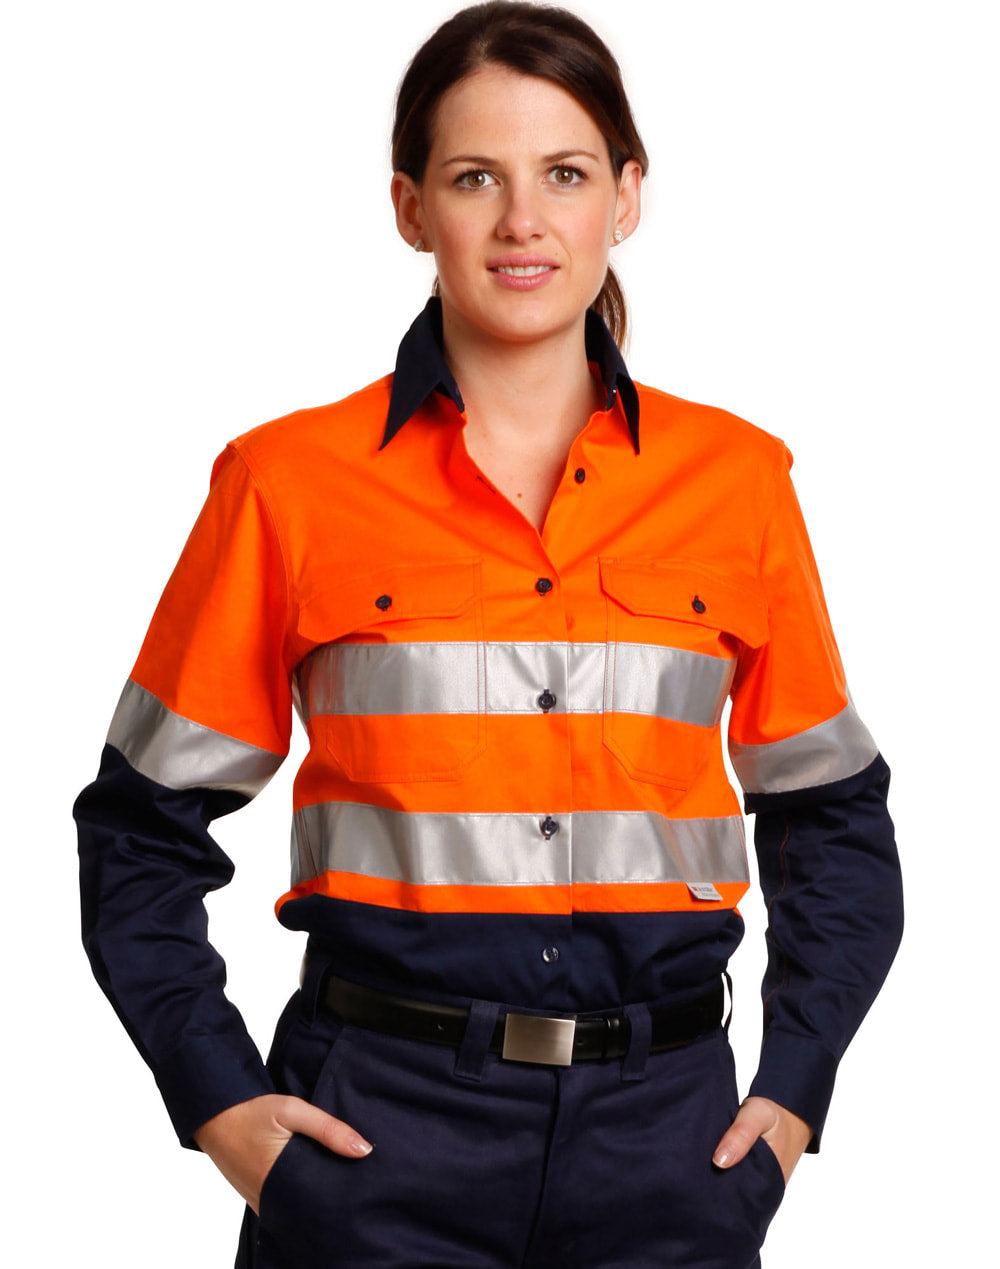 AIW SW65 WOMEN'S LONG SLEEVE SAFETY SHIRT